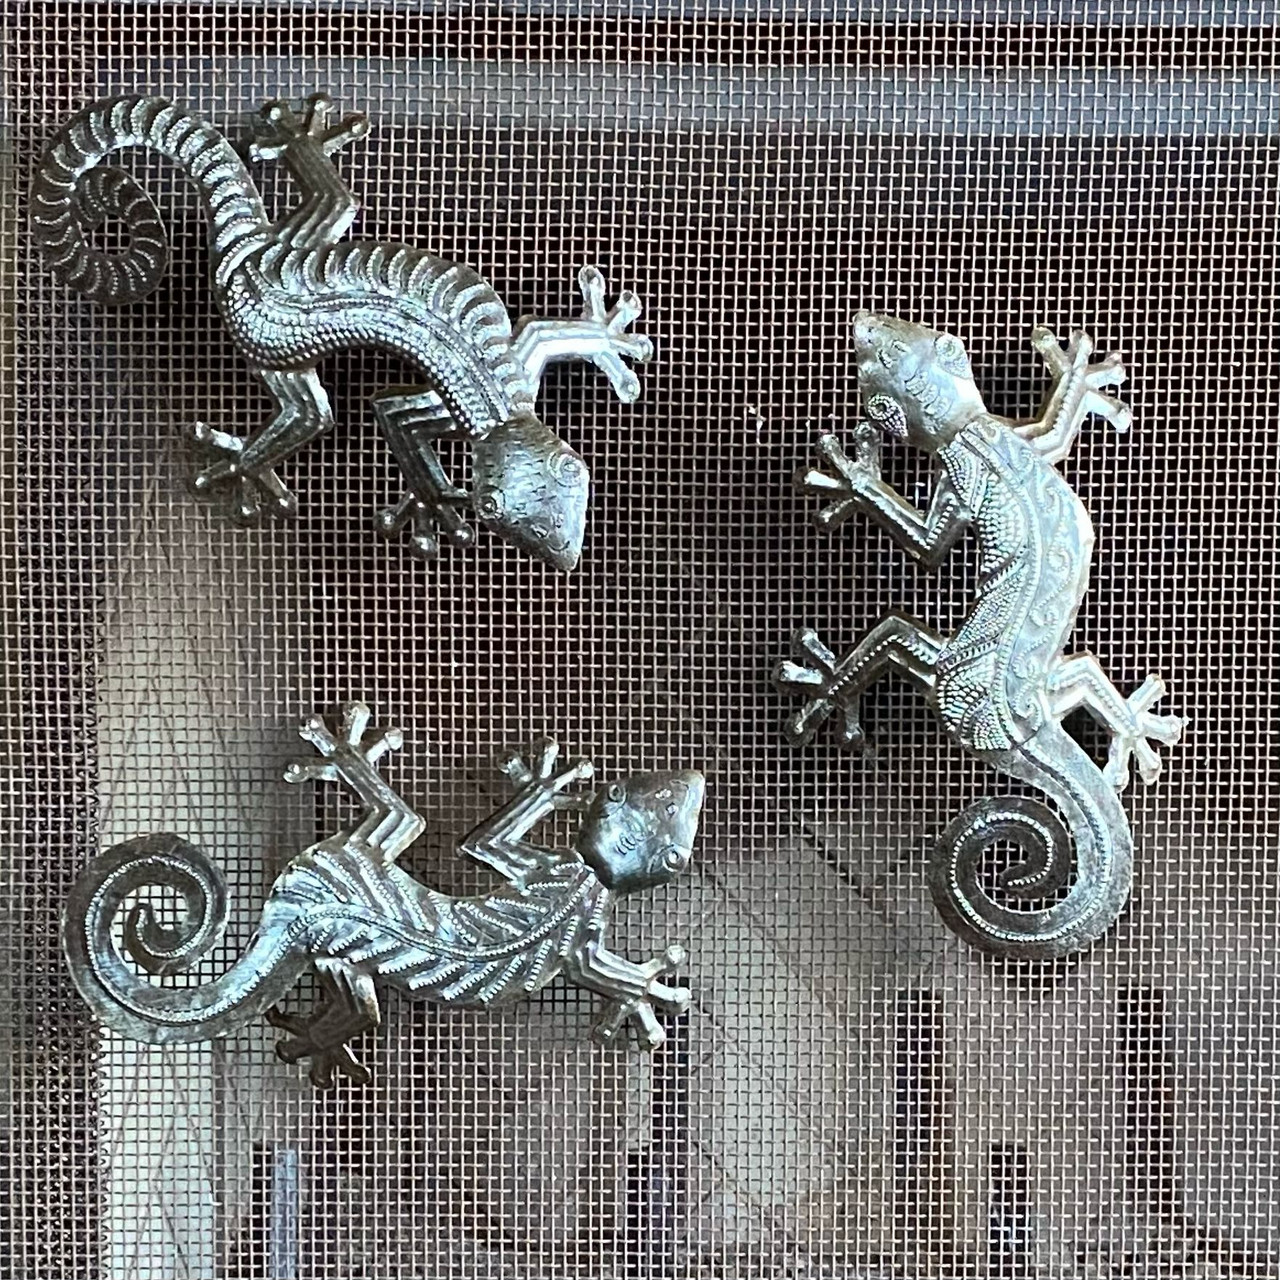 Garden Gecko, Set of 3 Wall Hanging Geckos, Handmade From Recycled Steel Drum Barrels 8 x 6 Inches, Spring Home Collection